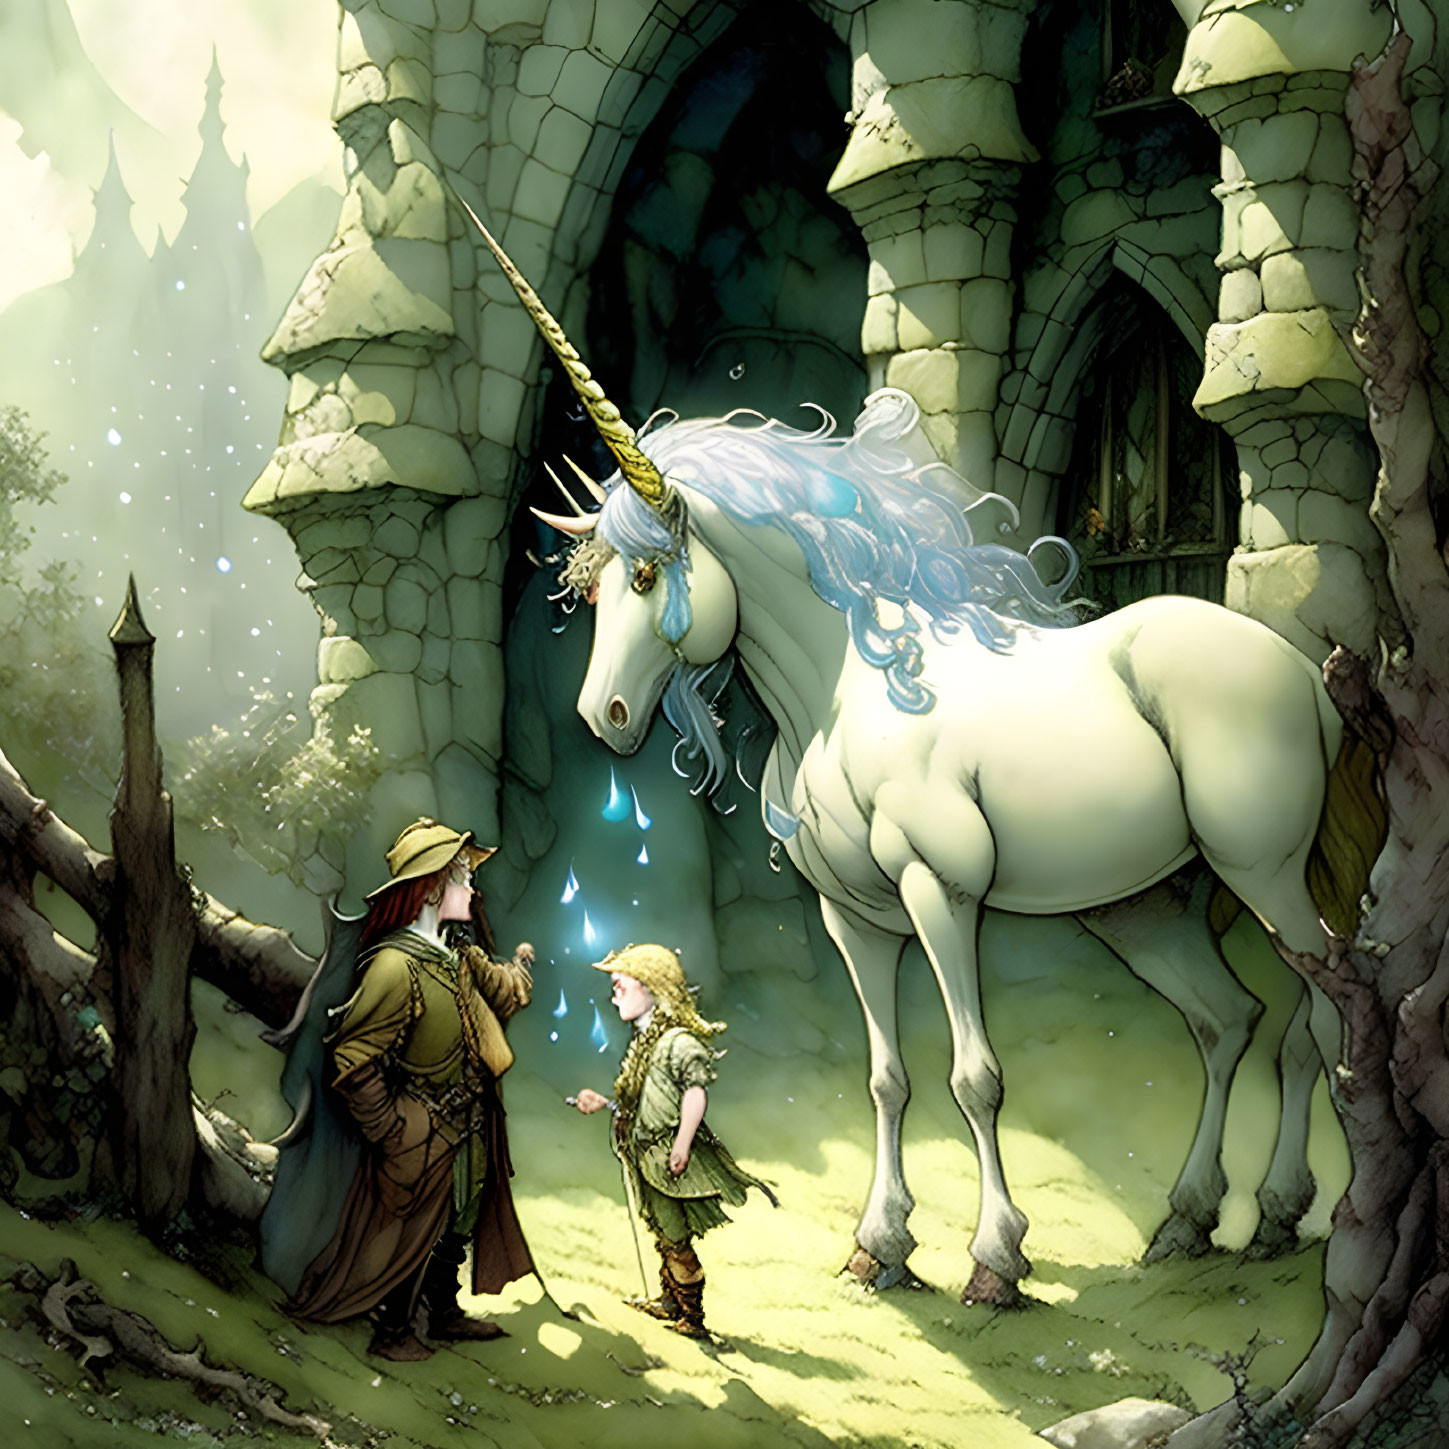 Mystical forest scene with unicorn, wizard, child, and castle